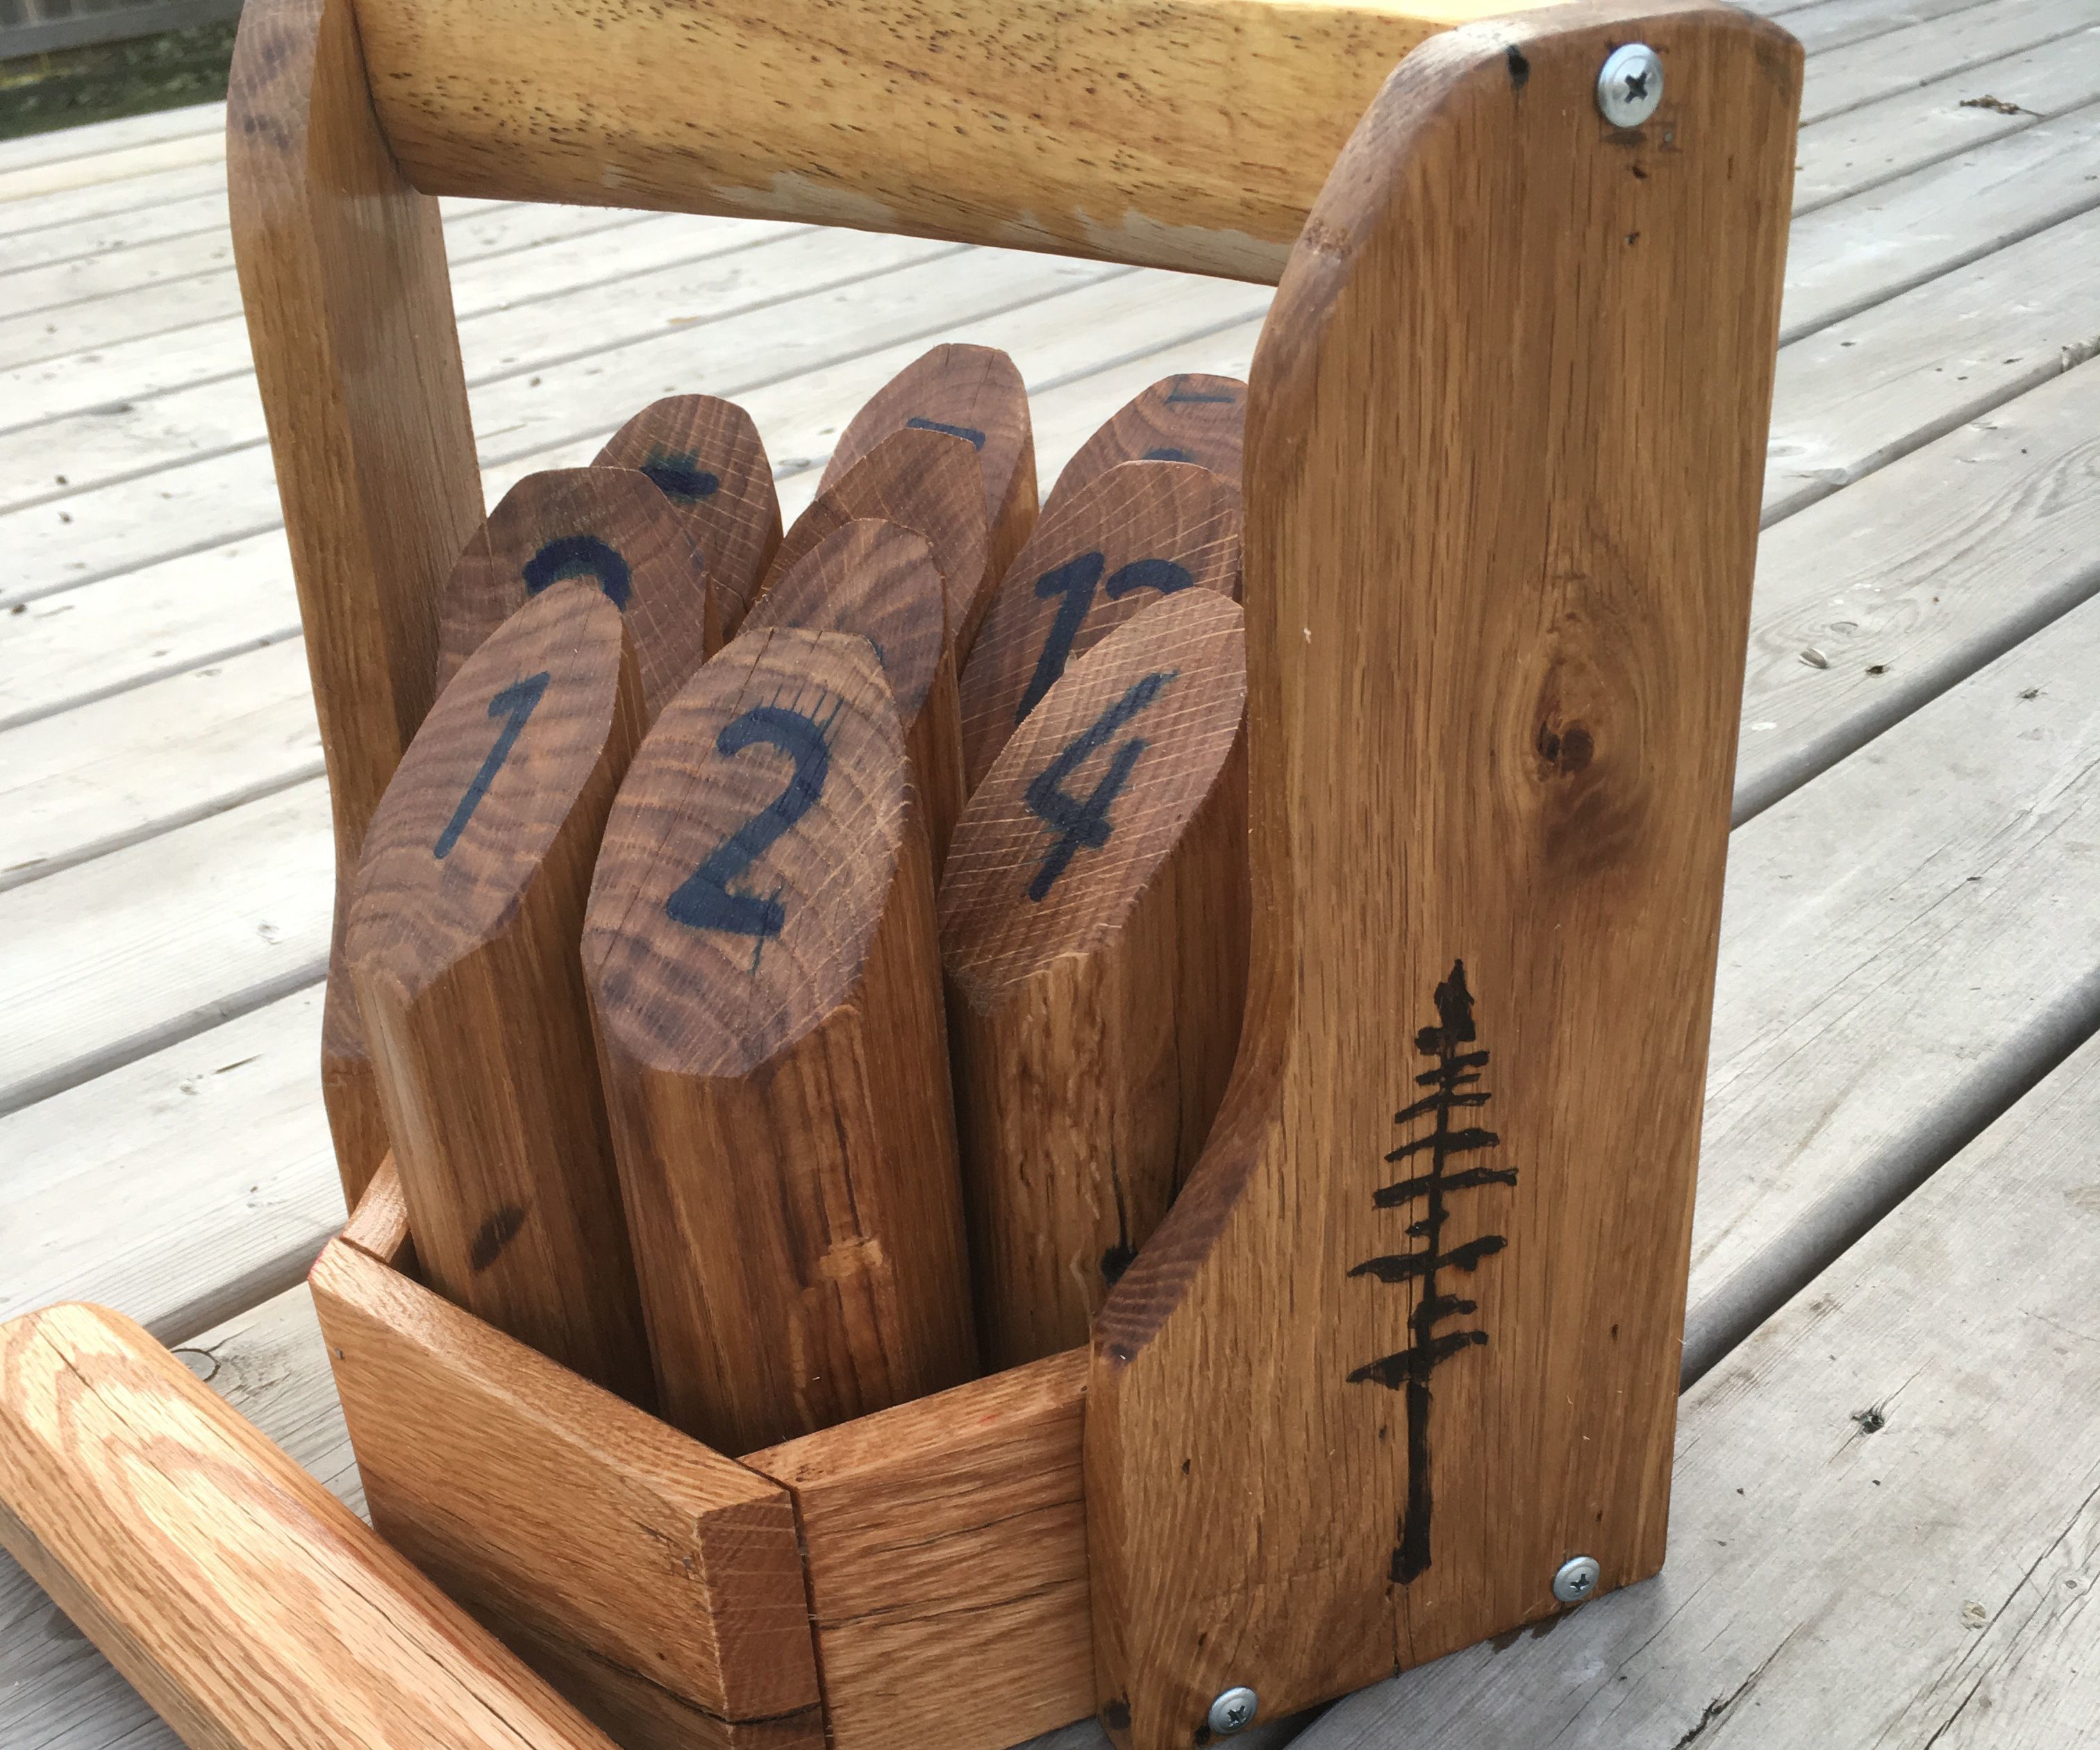 Making Molkky - an Outdoor Throwing Game With a Unique Carrying Case